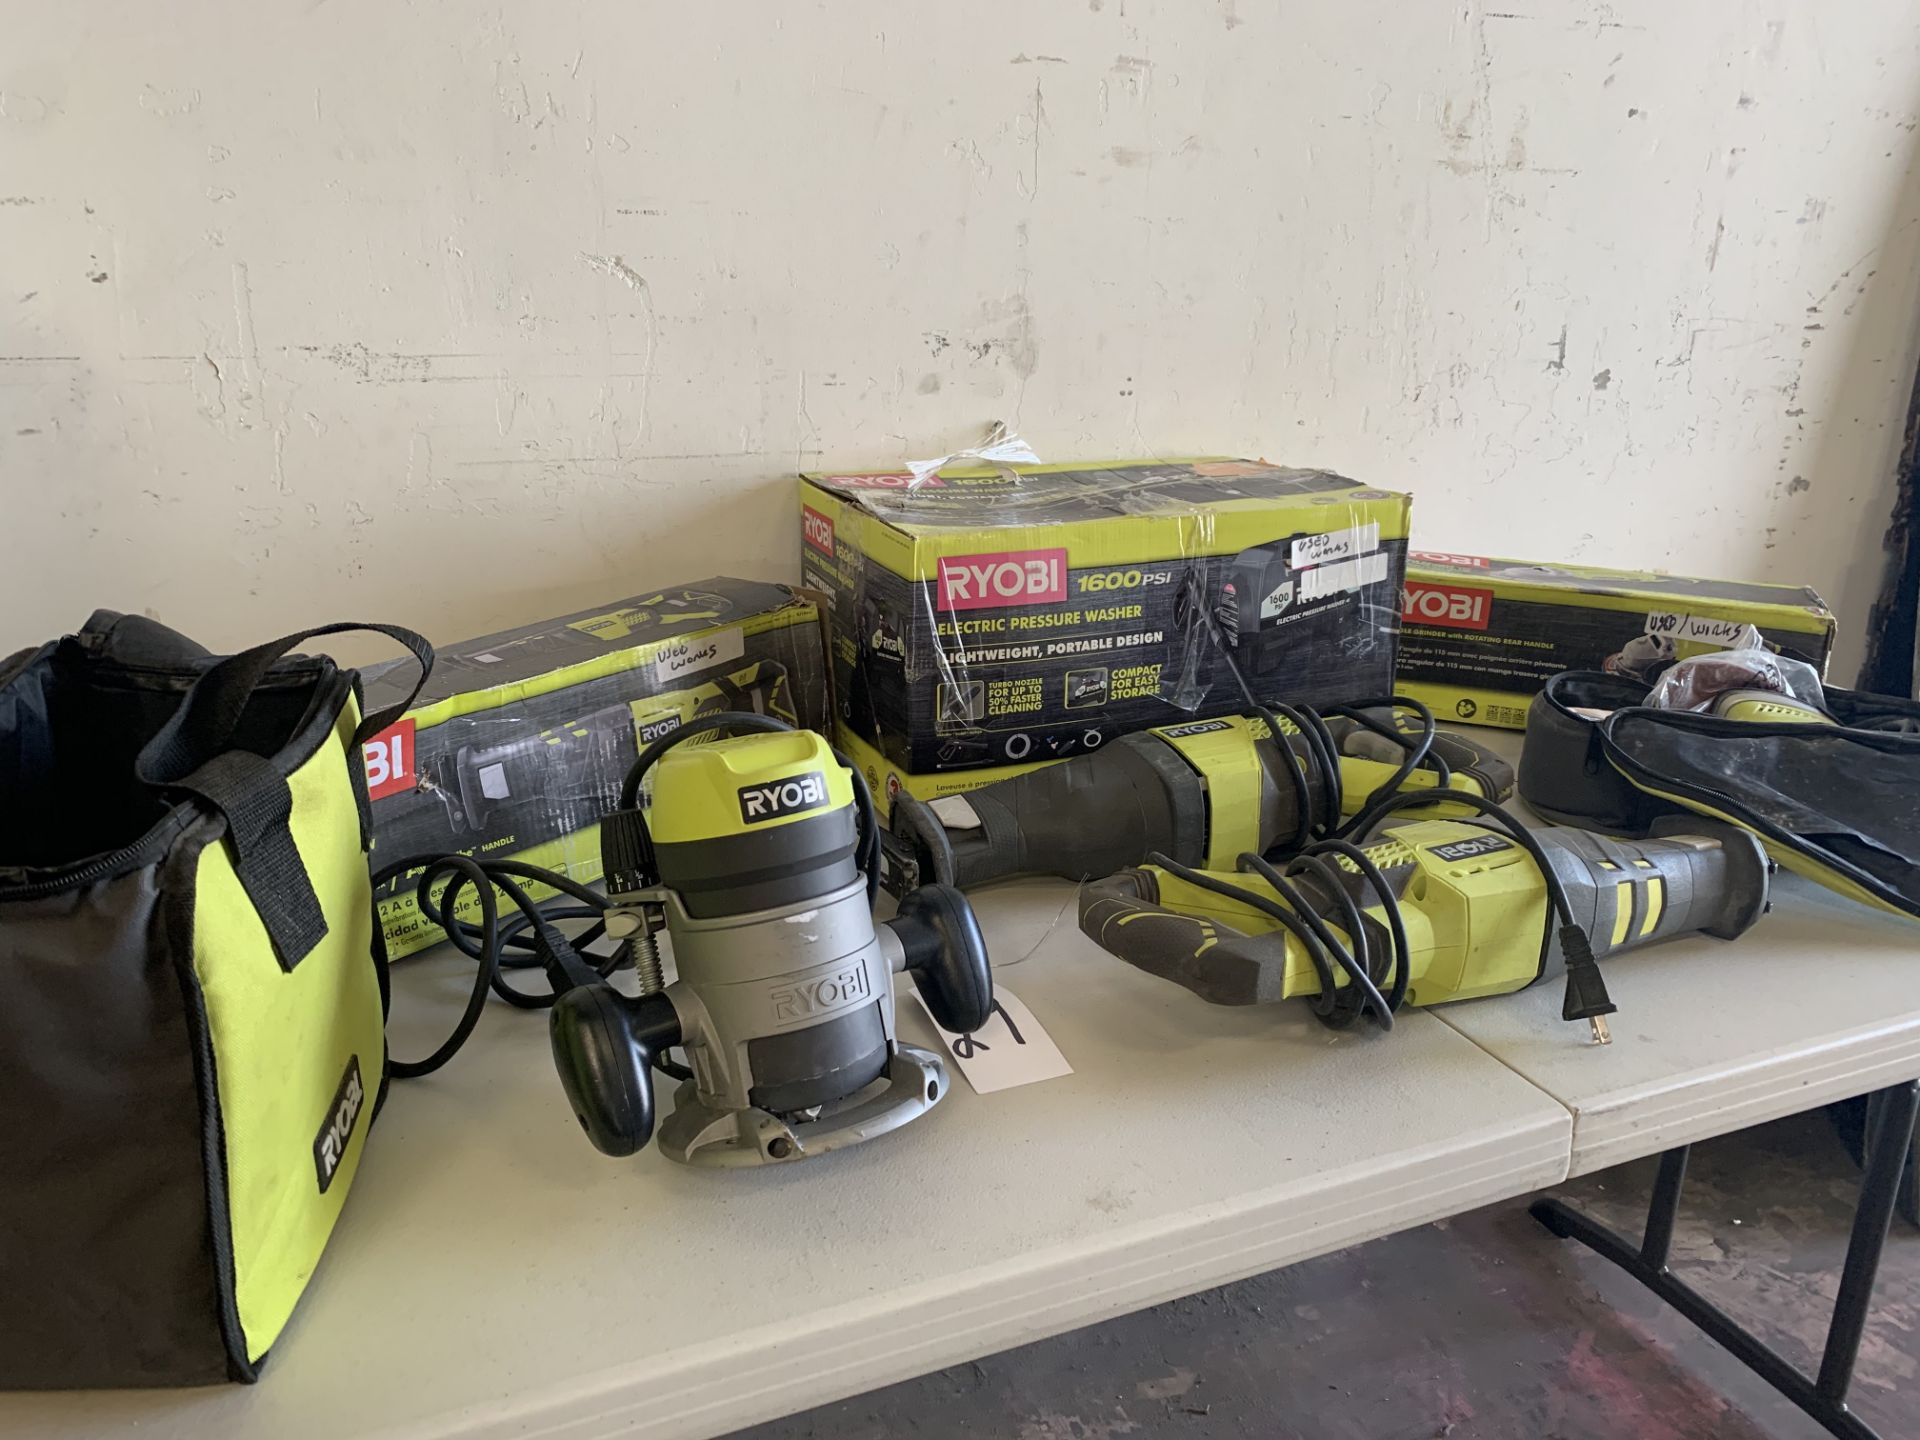 Ryobi Tools: Router, Reciprocating Saws, Sander. (Tested and Works) - Image 3 of 3